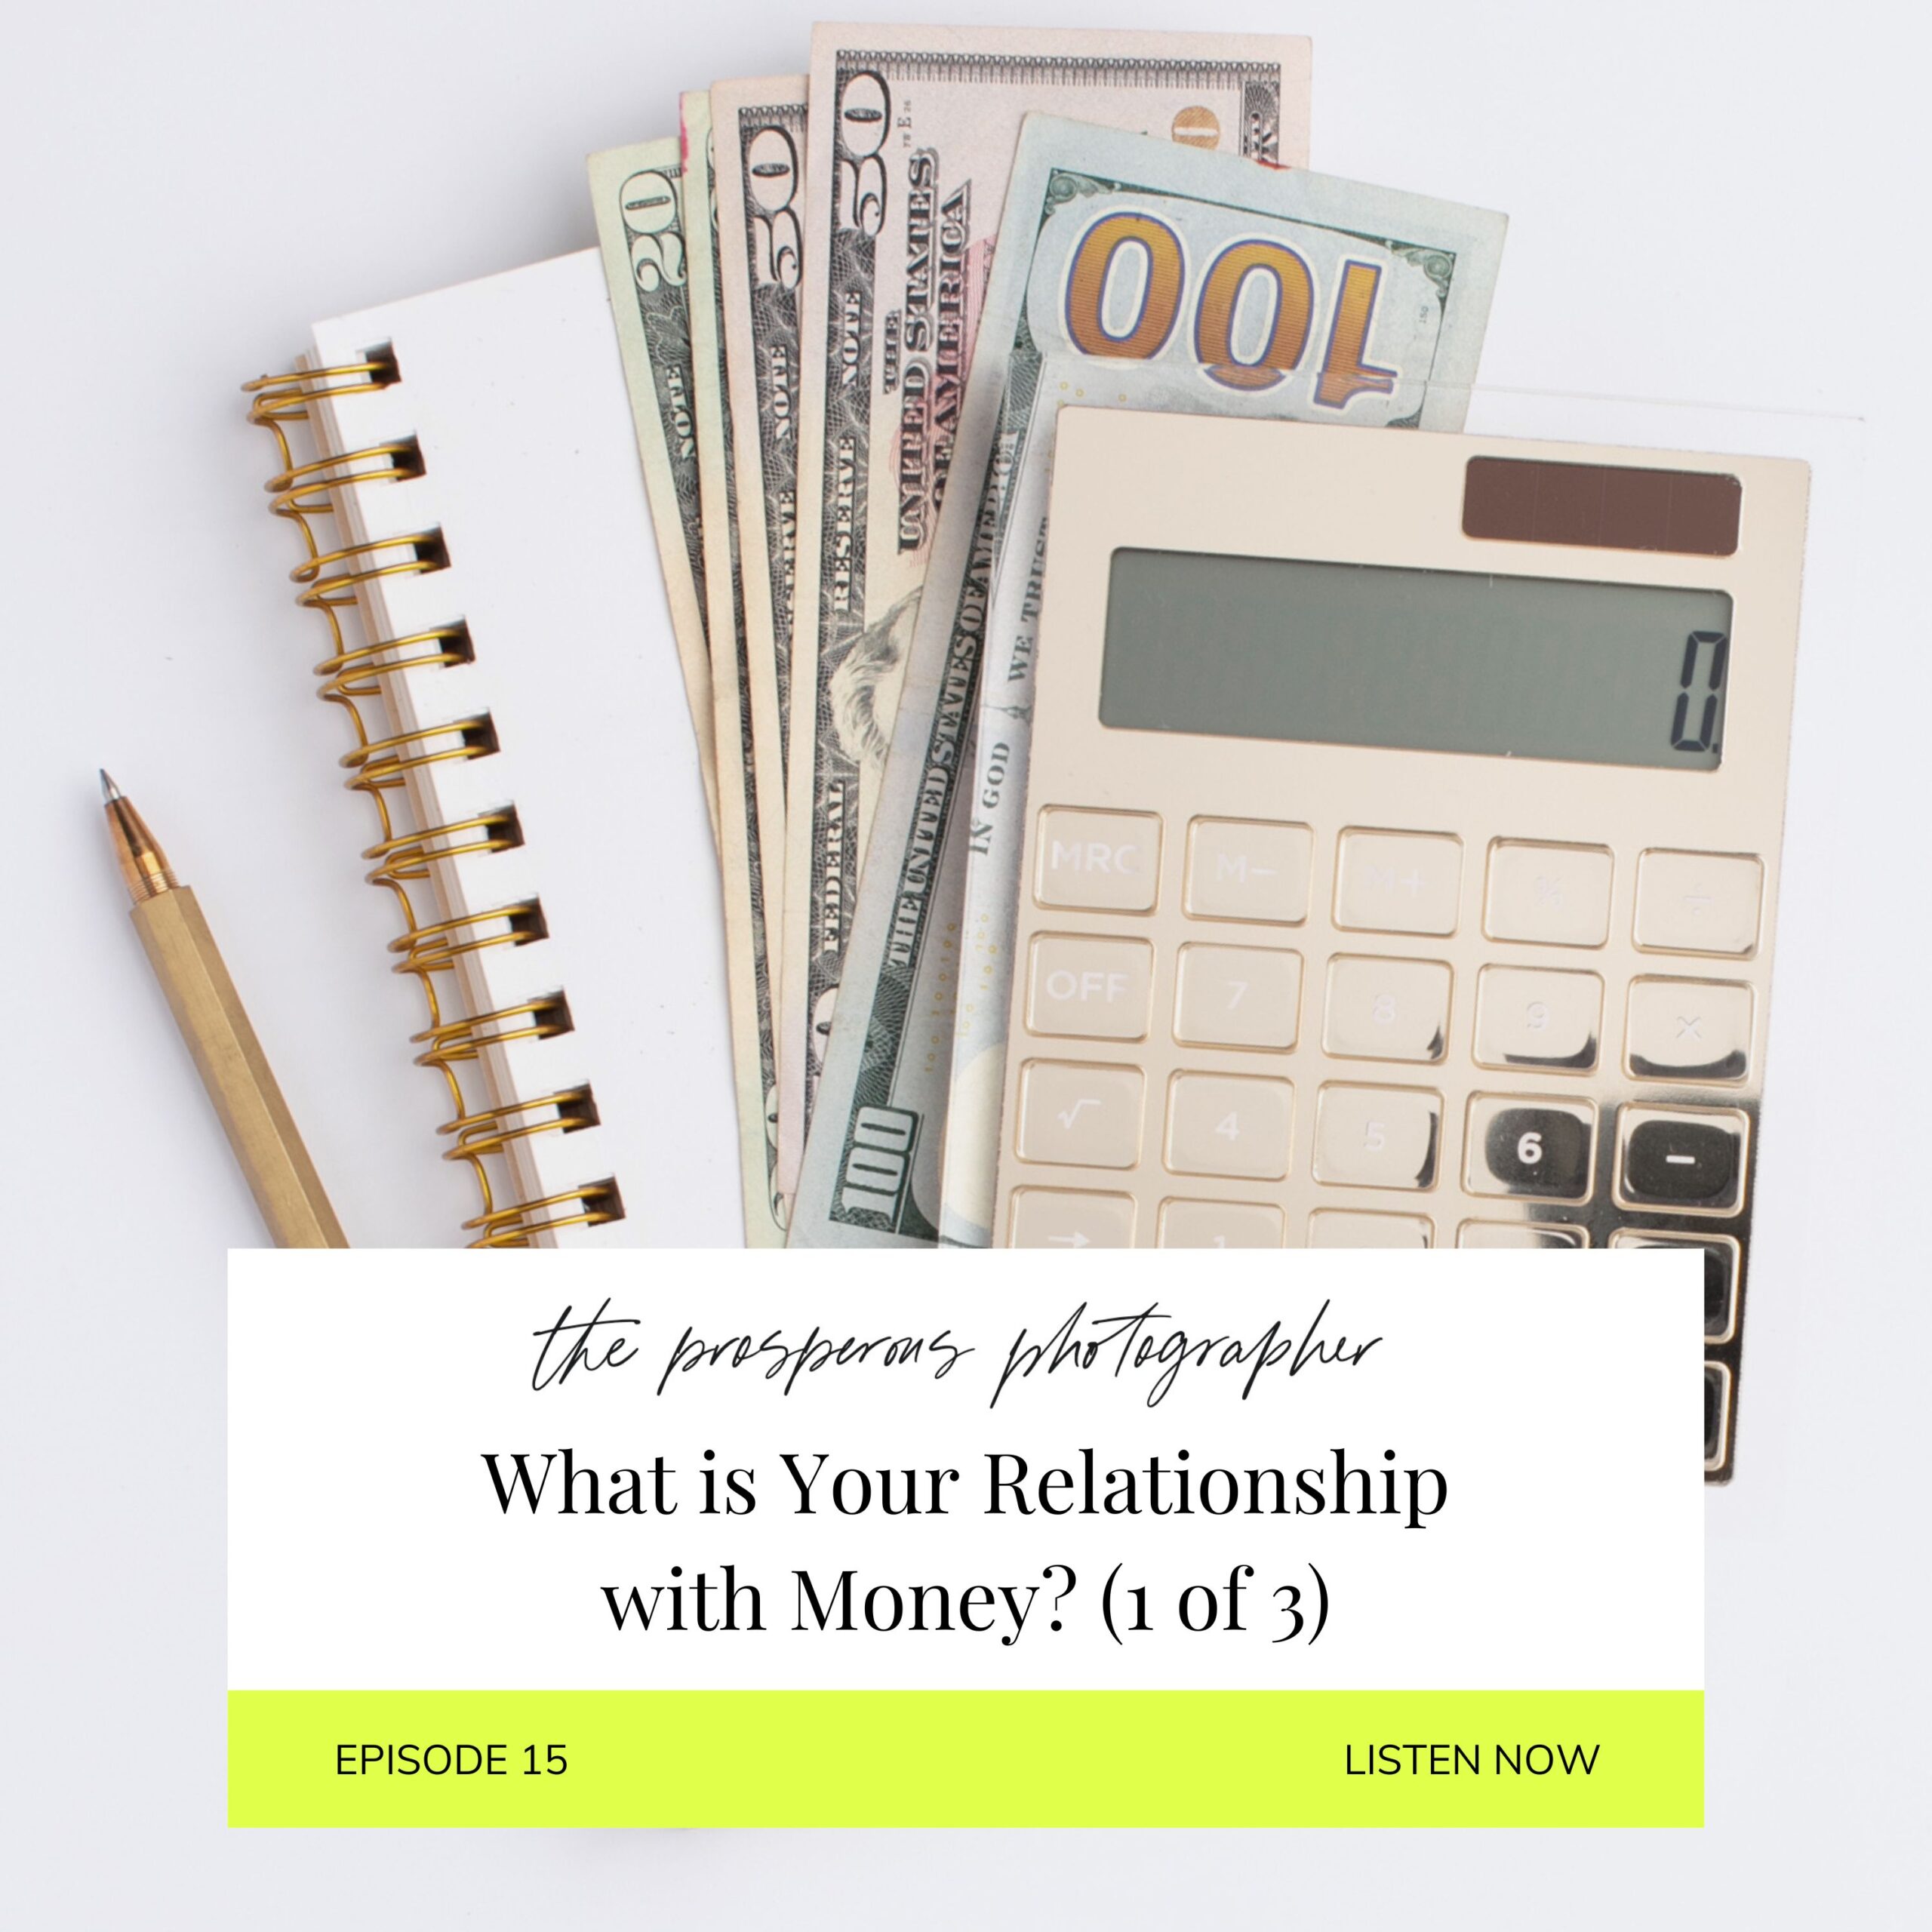 what is your relationship with money?